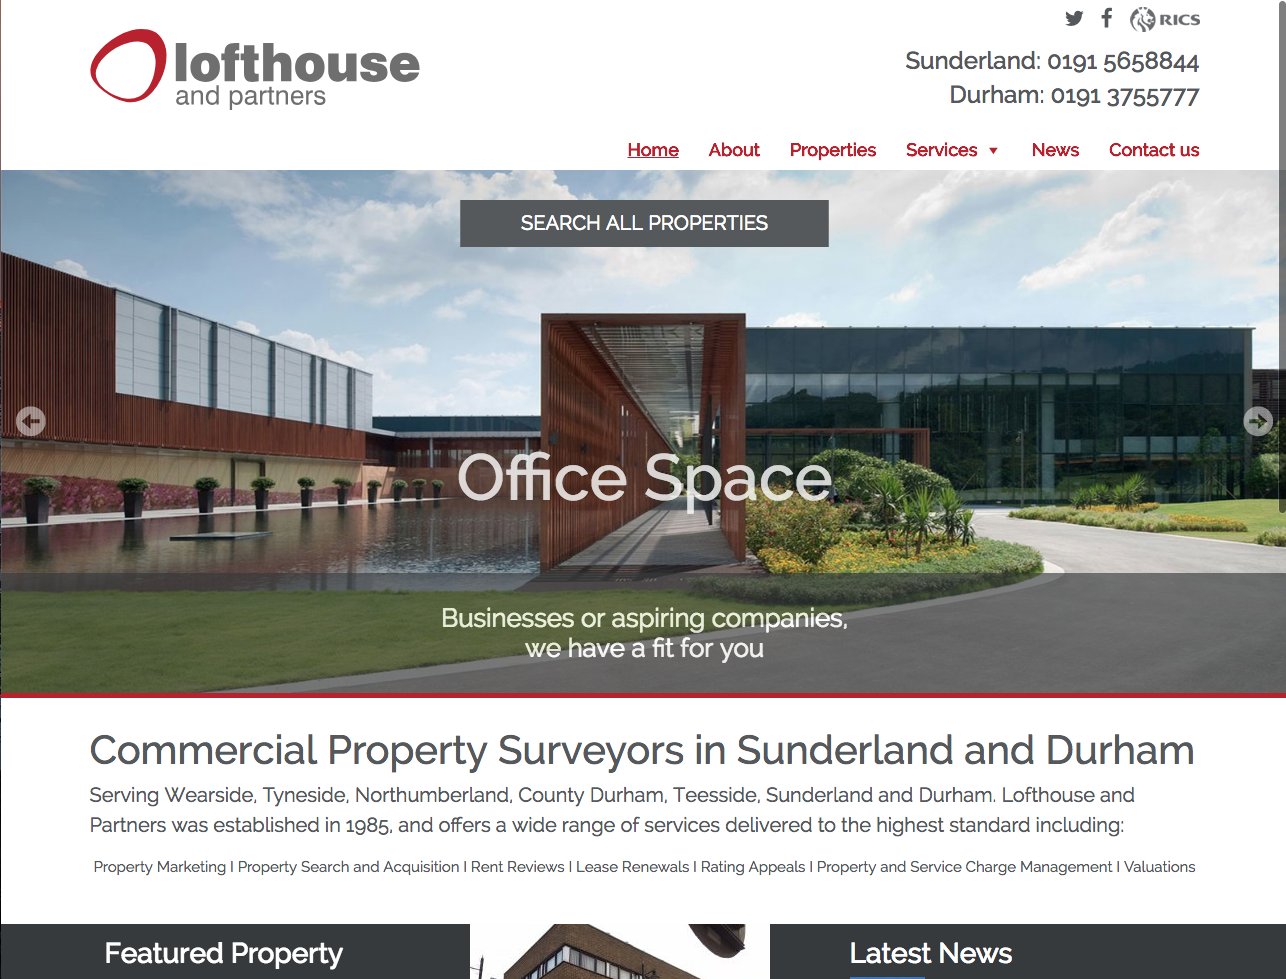 Lofthouse and Partners